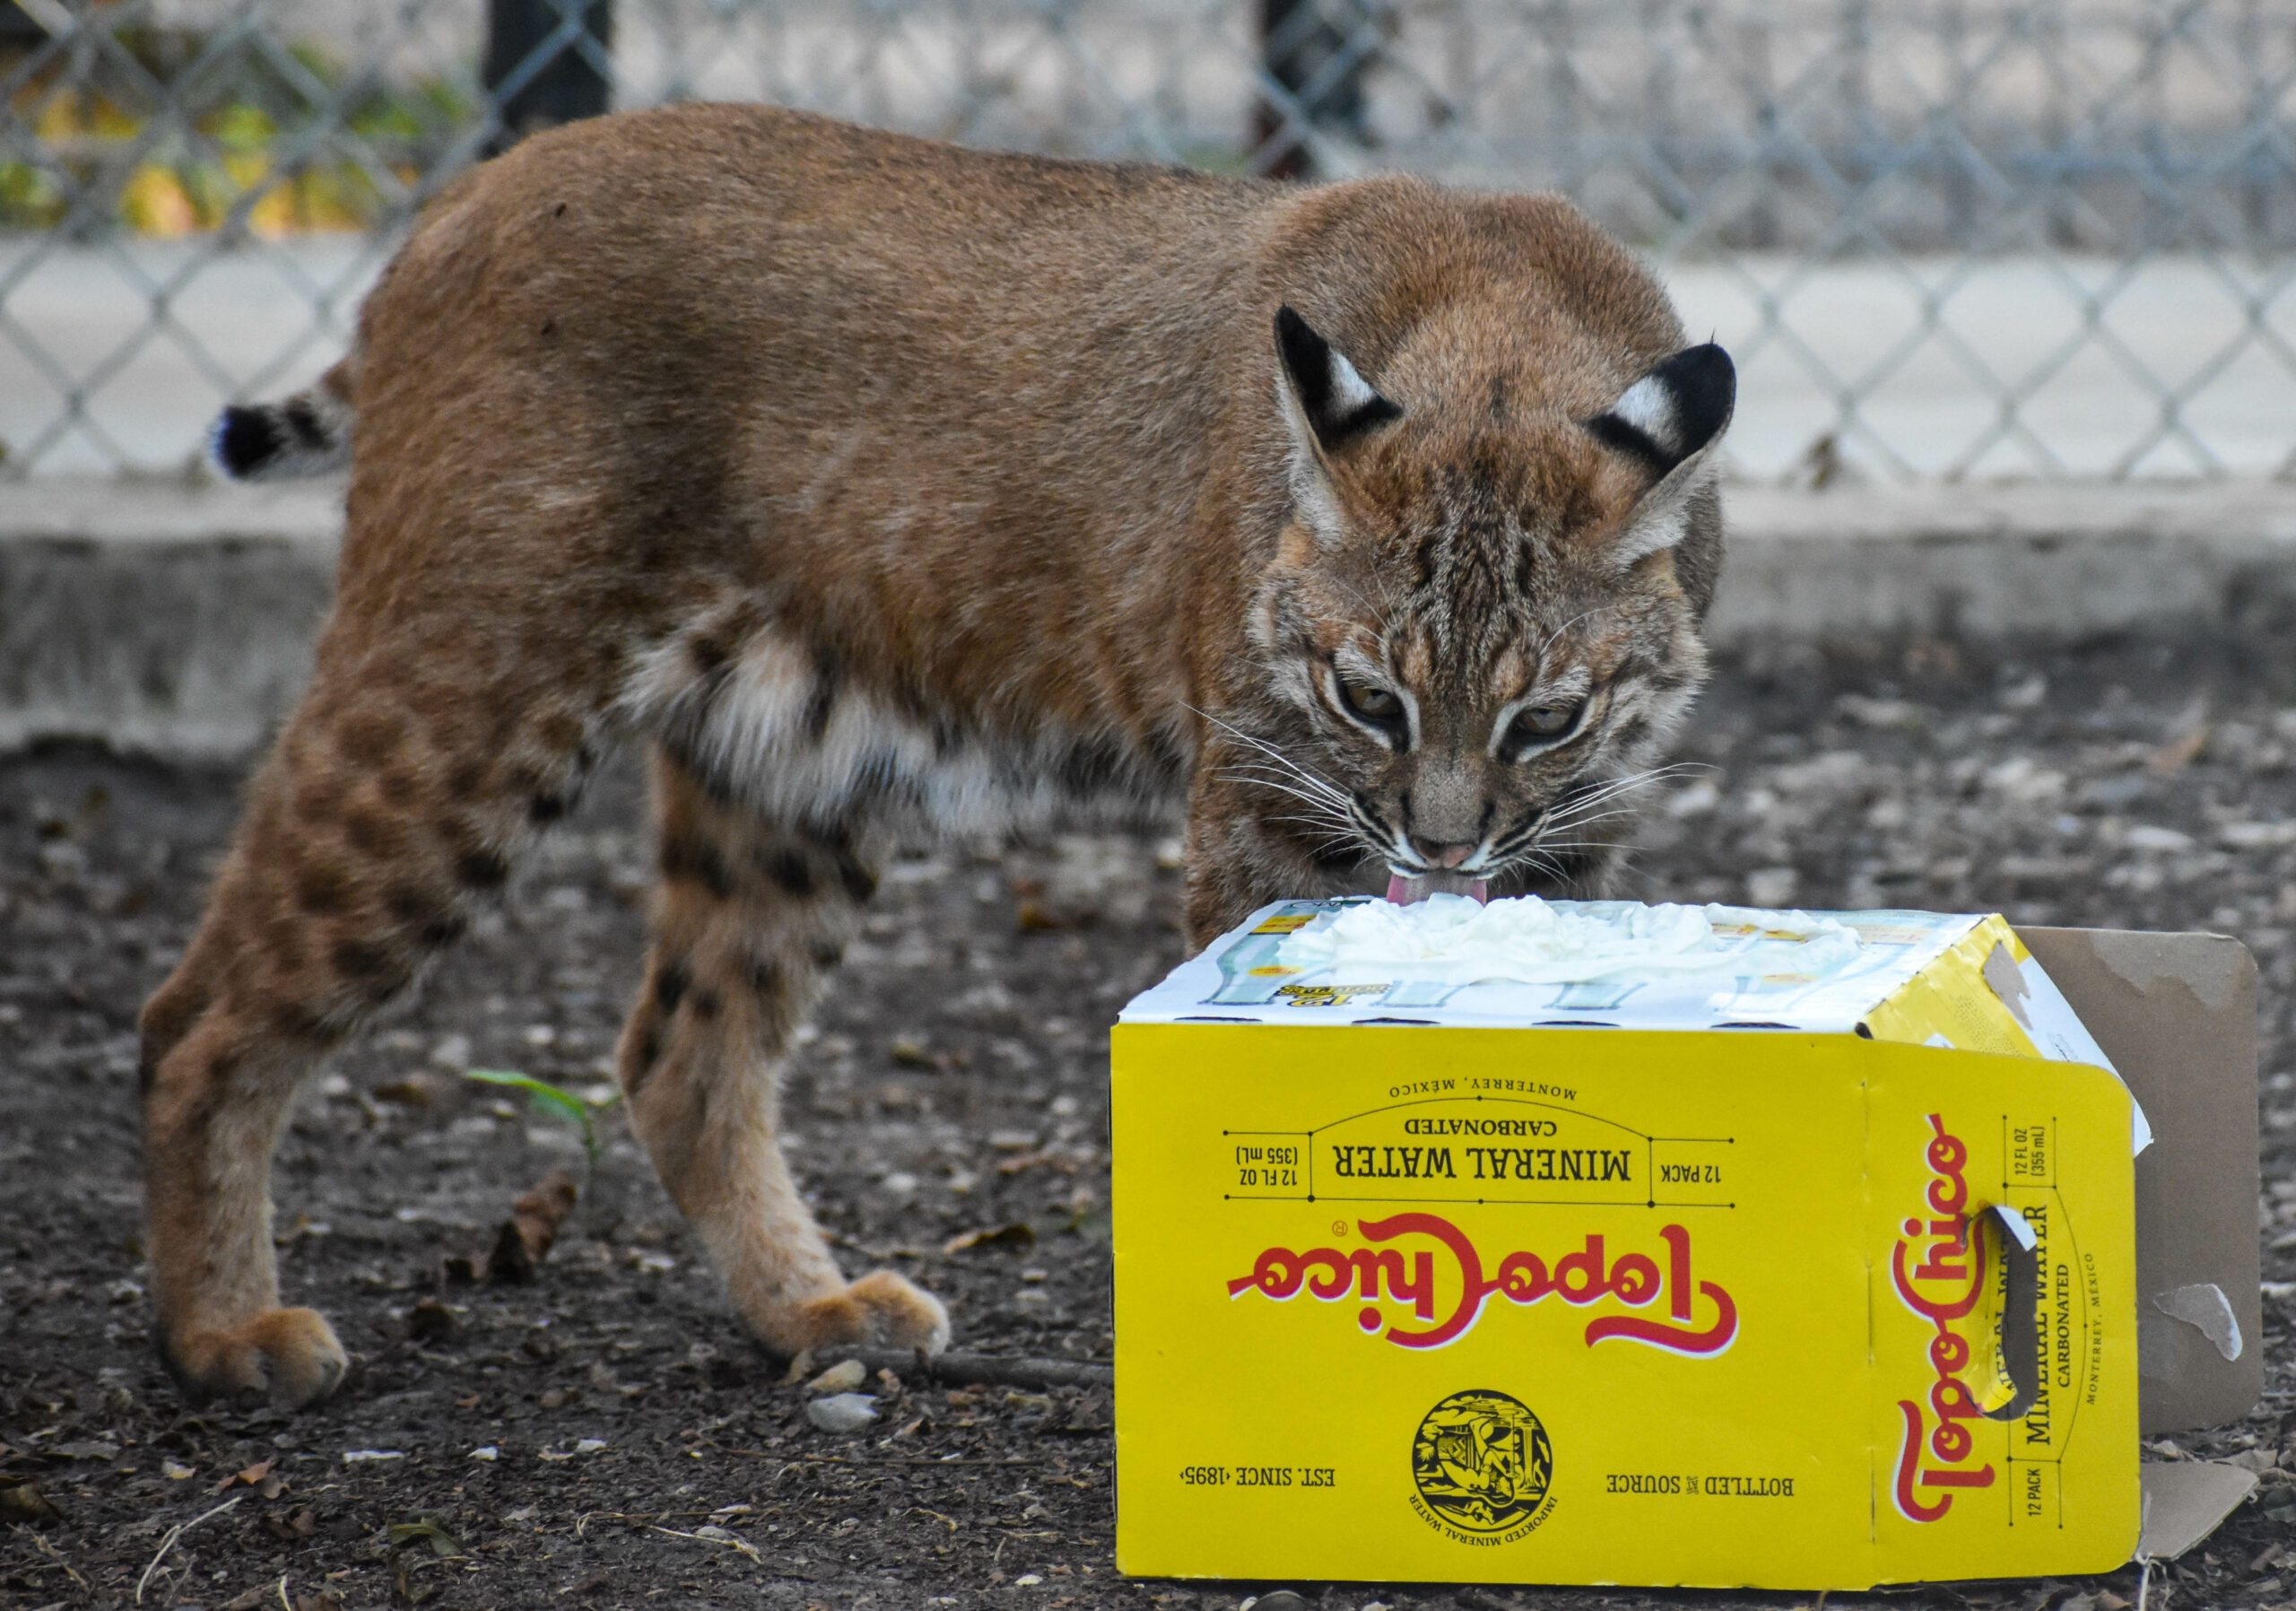 mary playing with a topo chico box